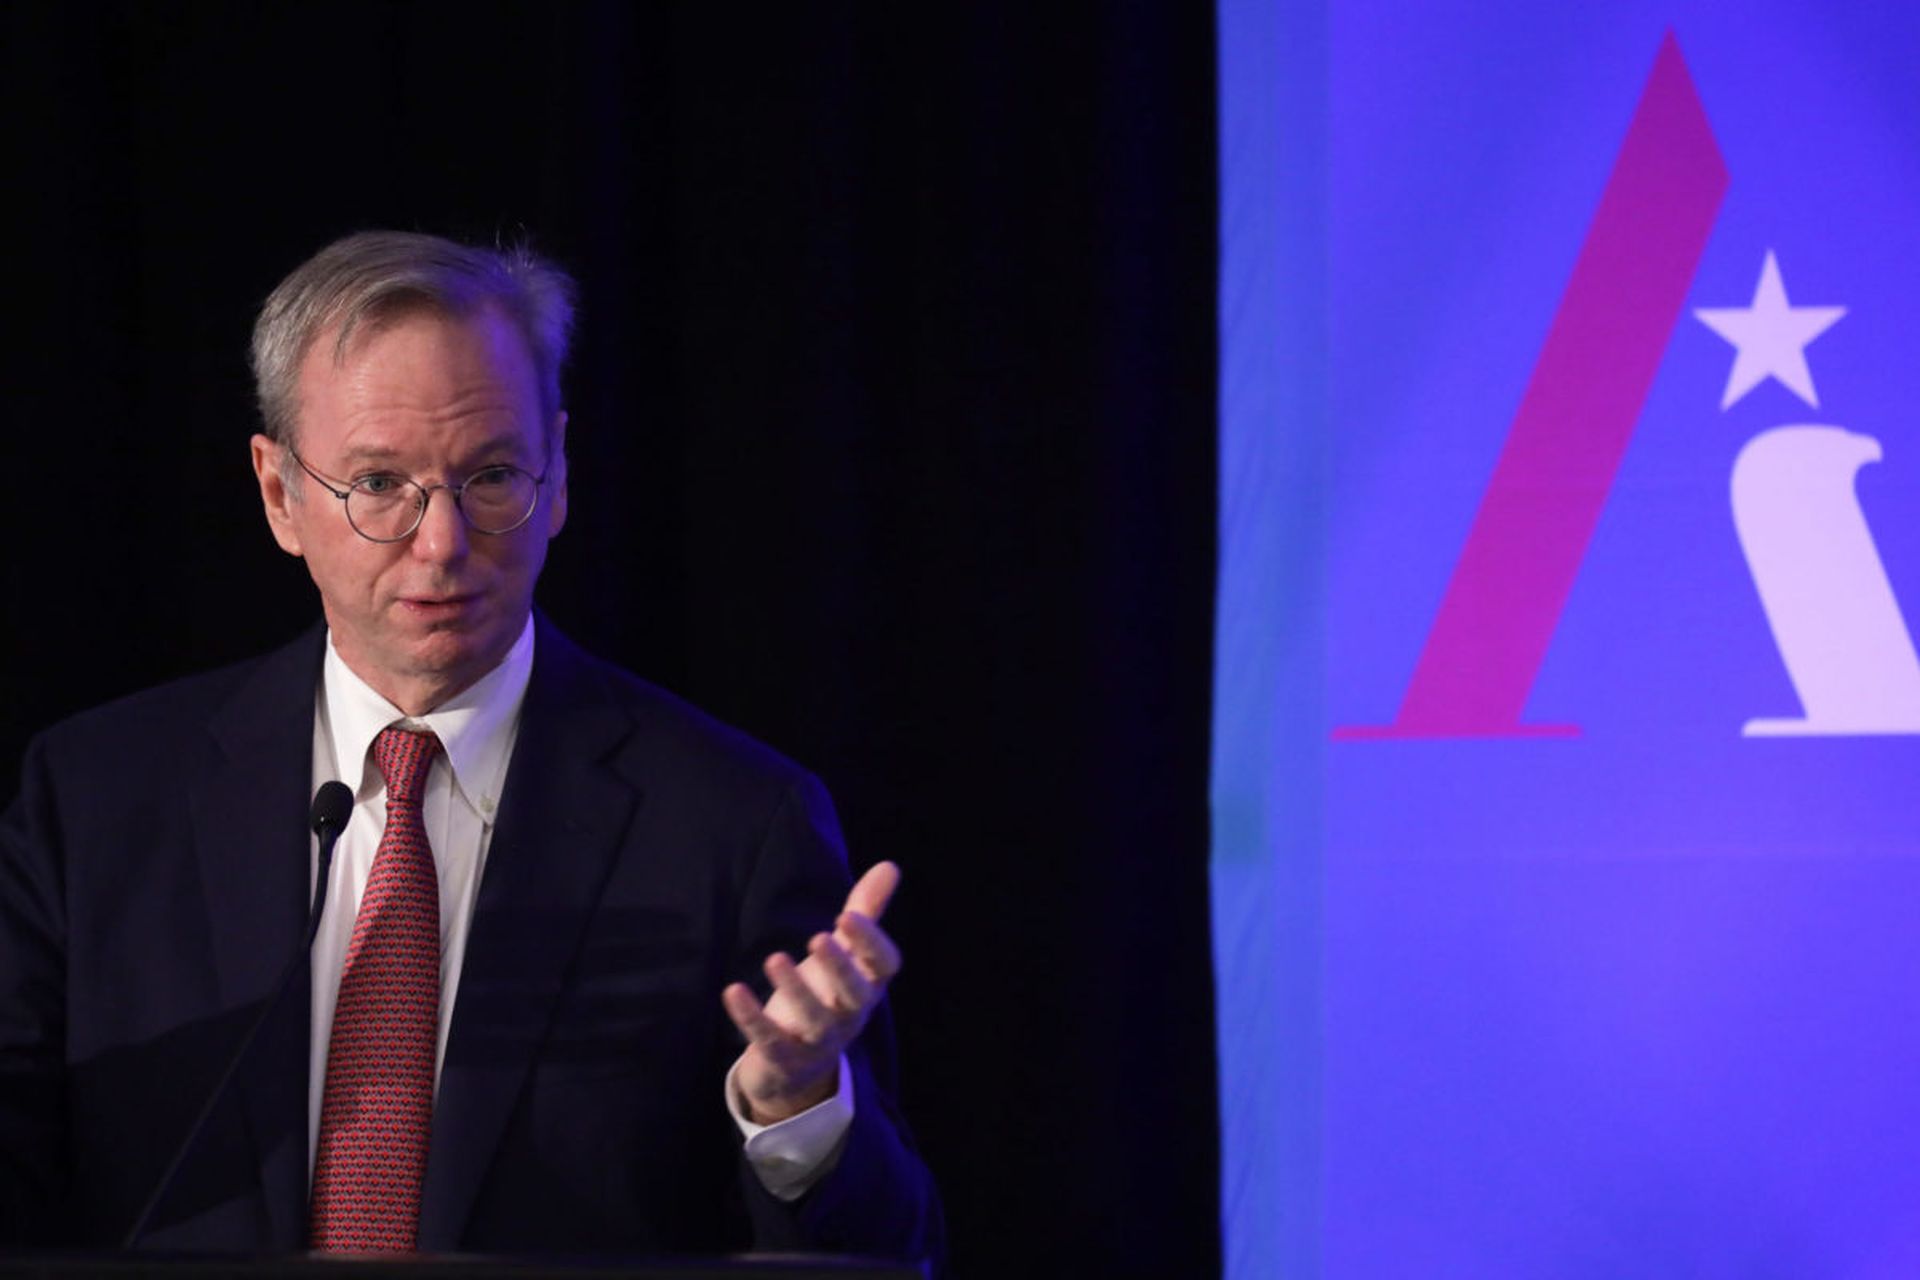 Executive Chairman of Alphabet Inc., Google&#8217;s parent company, Eric Schmidt speaks during a National Security Commission on Artificial Intelligence (NSCAI) conference November 5, 2019 in Washington, DC. A Senate bill could create new security and accountability requirements on contractors that develop or manage AI systems for the government. (...